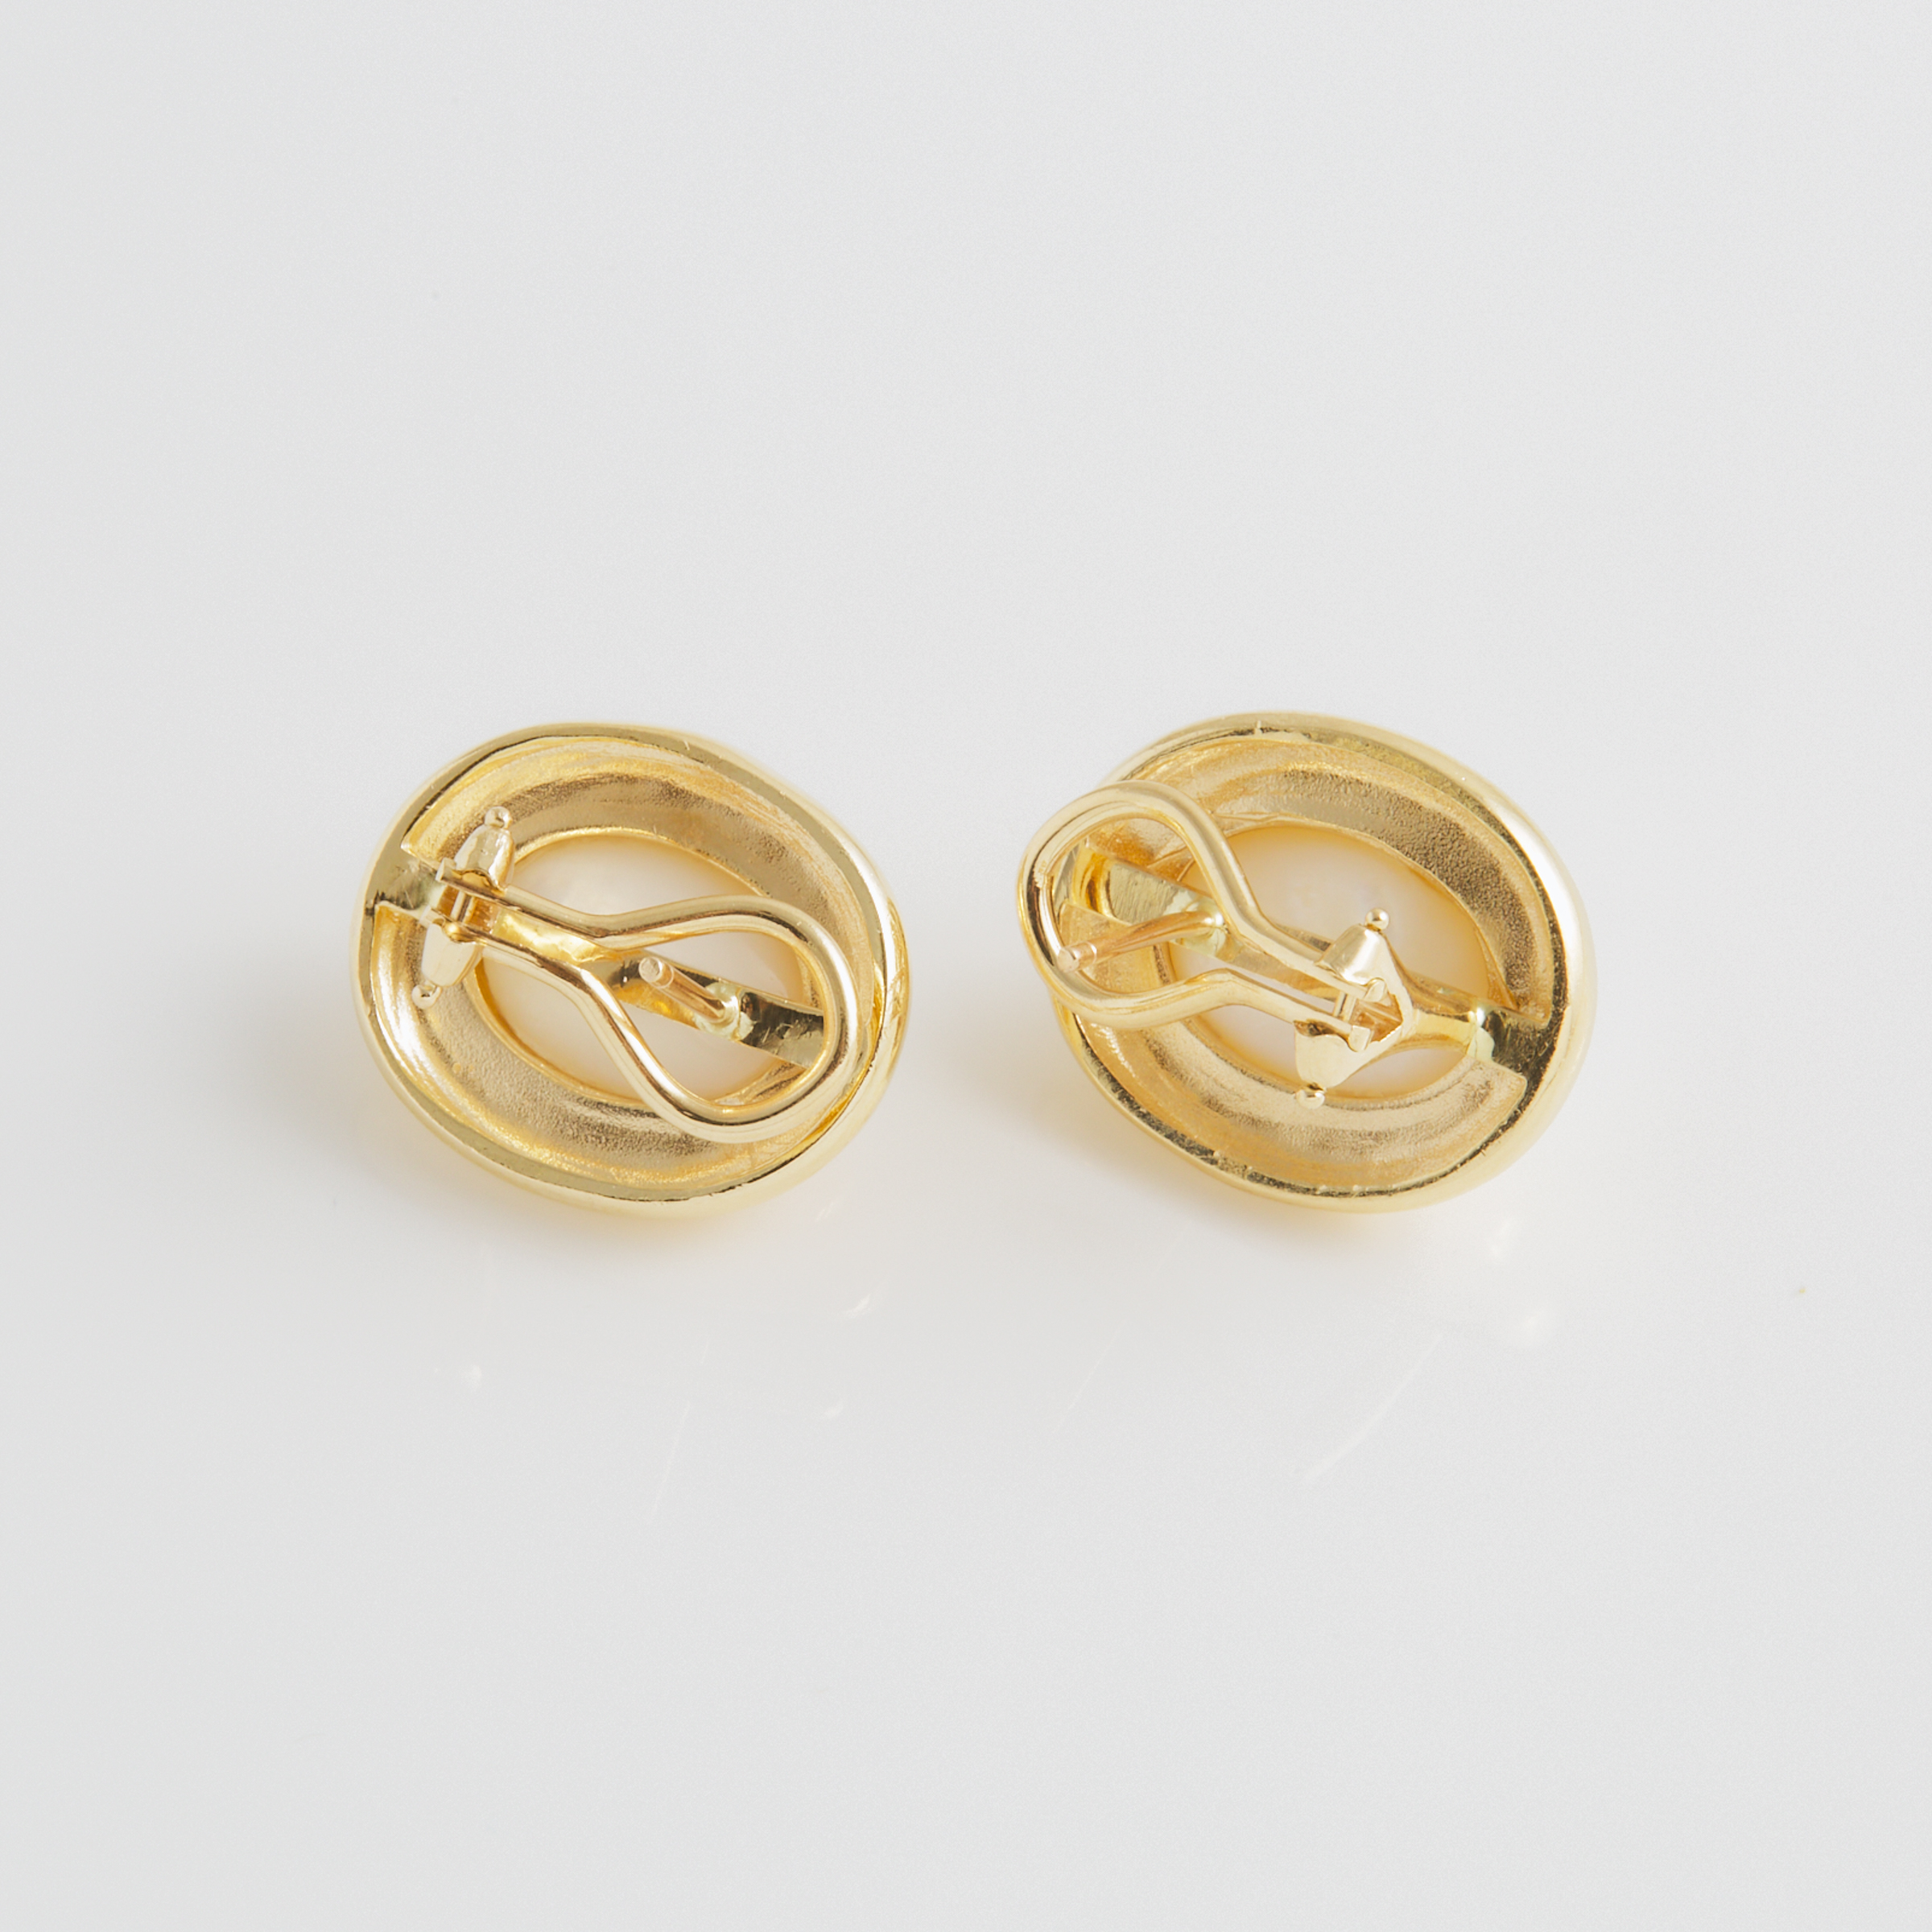 Pair of 14k Yellow Gold Button Earrings